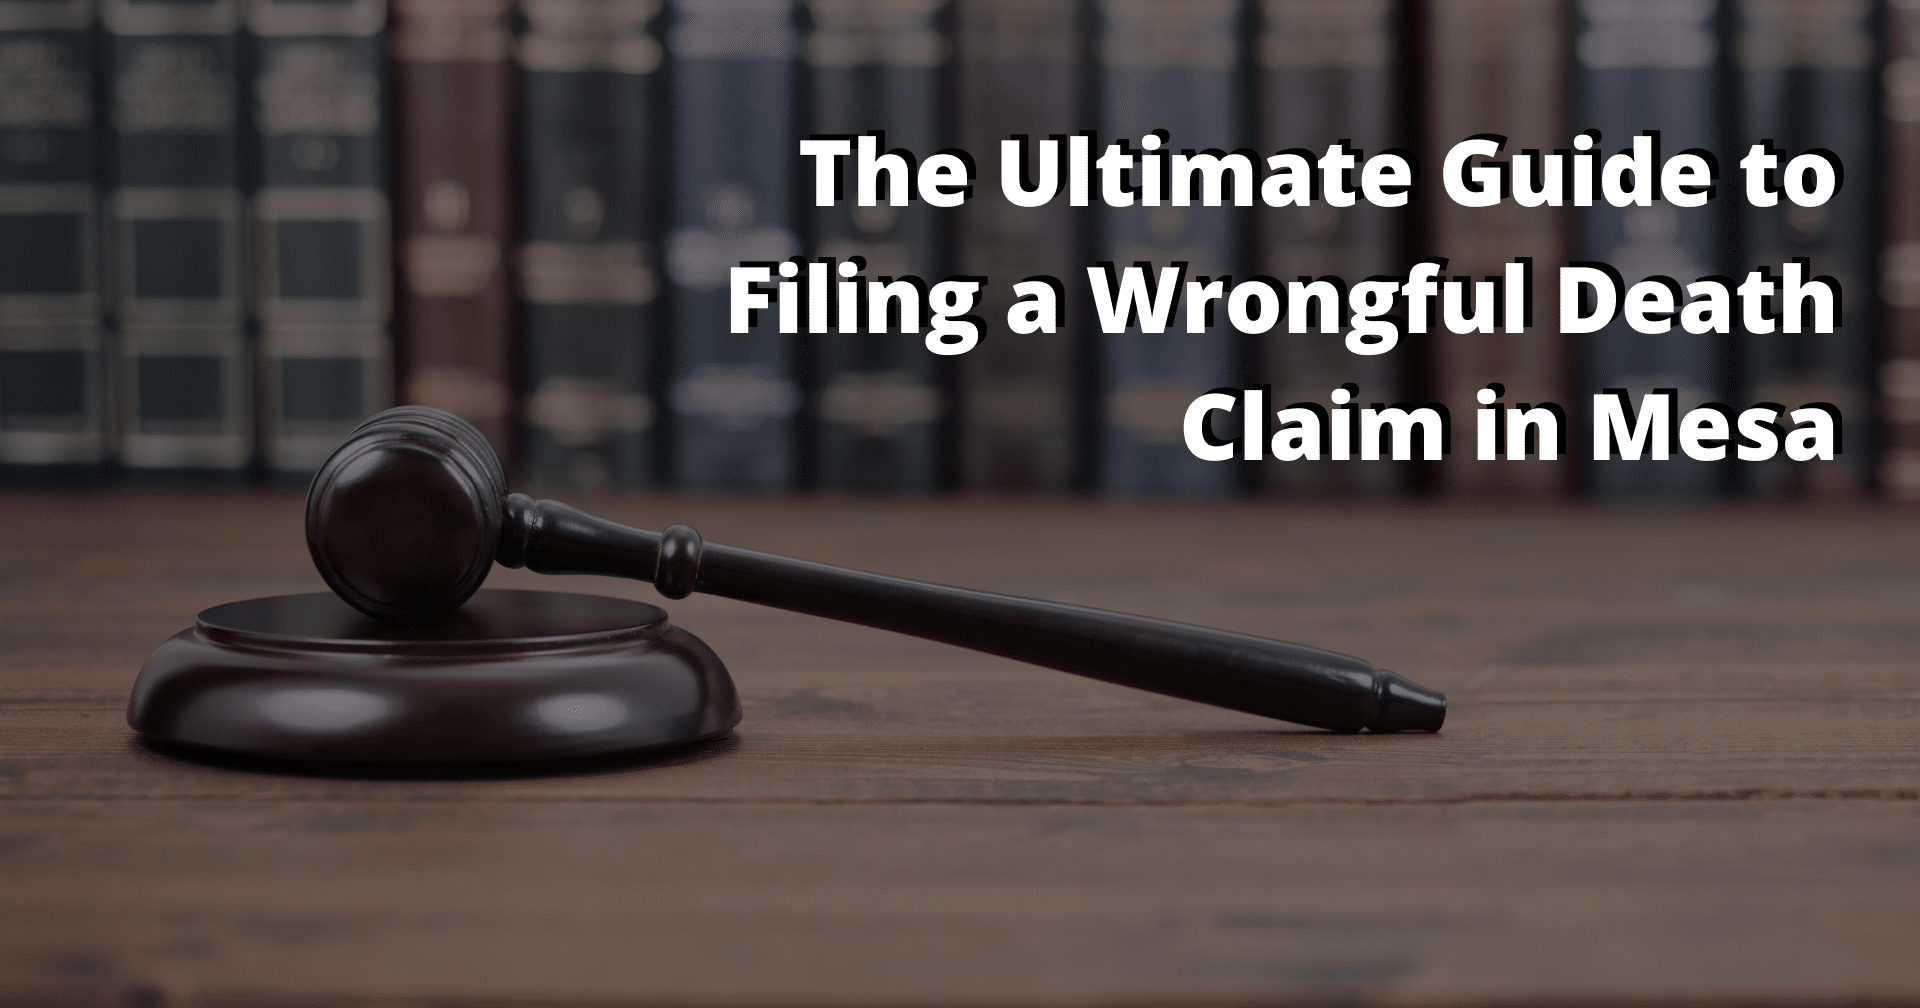 The Ultimate Guide to Filing a Wrongful Death Claim in Mesa